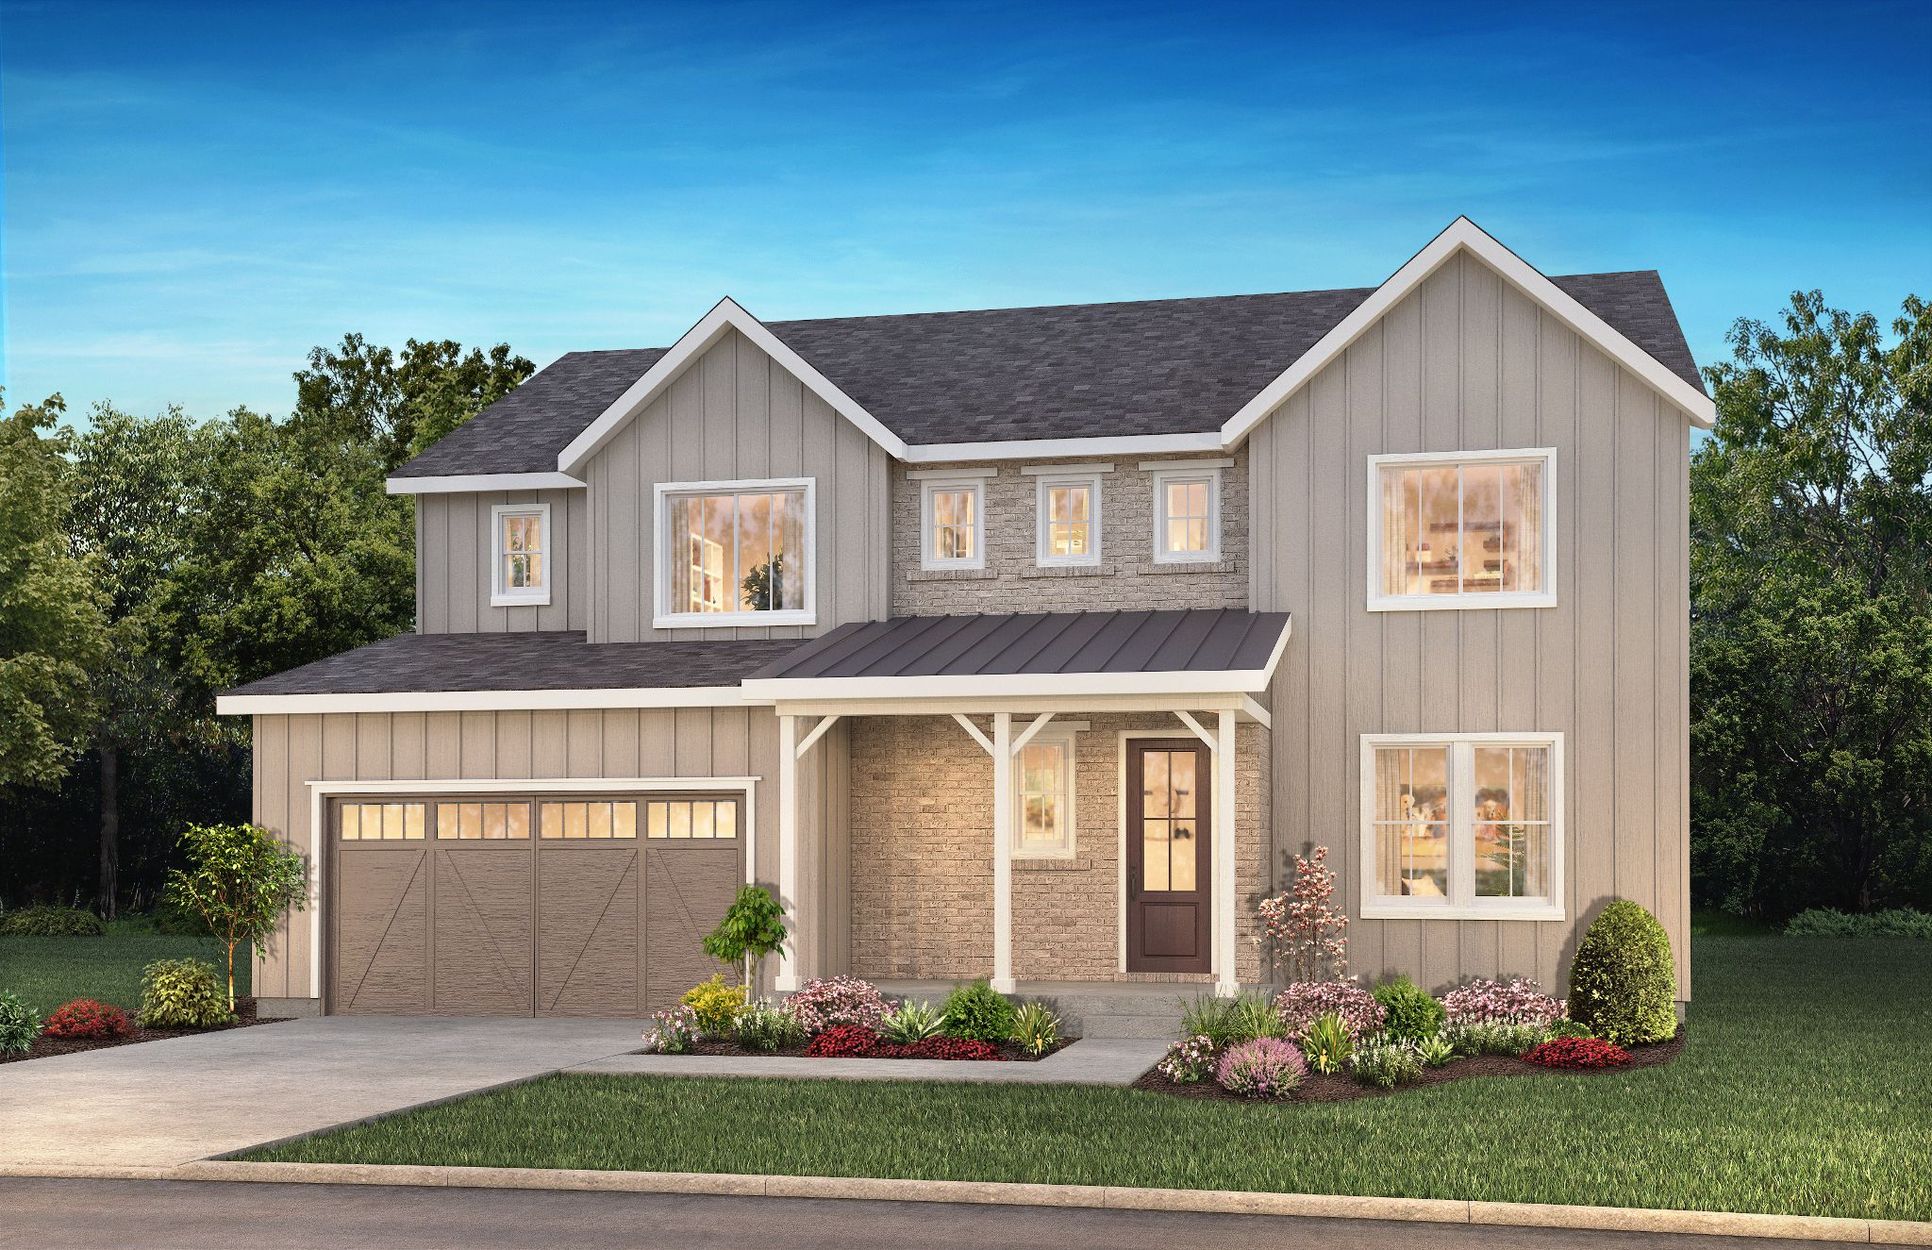 The Canyons Luxe Weston Elevation A:Exterior A: Modern Farmhouse